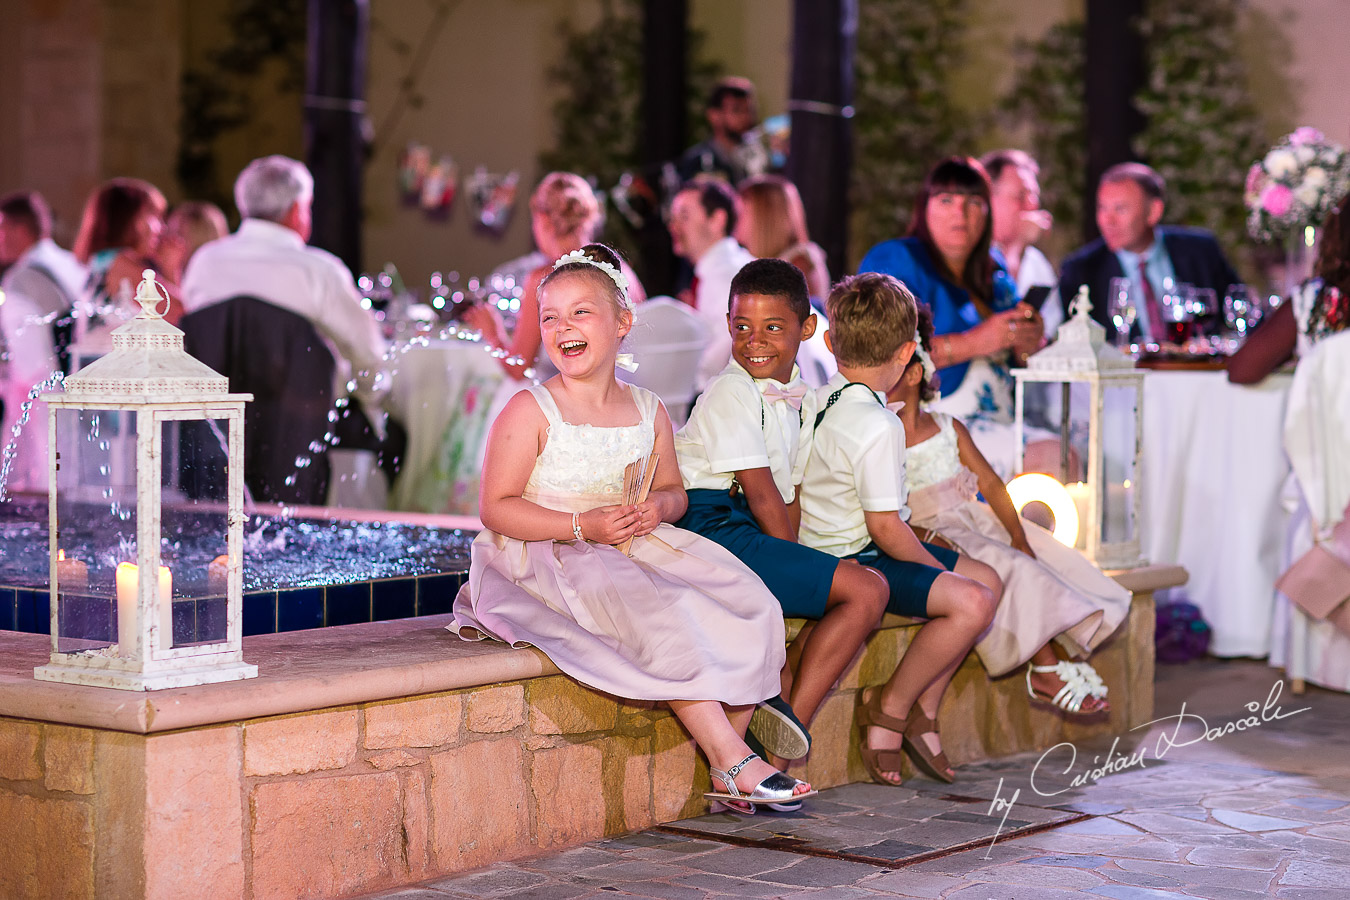 Wedding dinner moments captured by Cristian Dascalu at a wedding at The Aphrodite Hills Resort in Paphos, Cyprus.